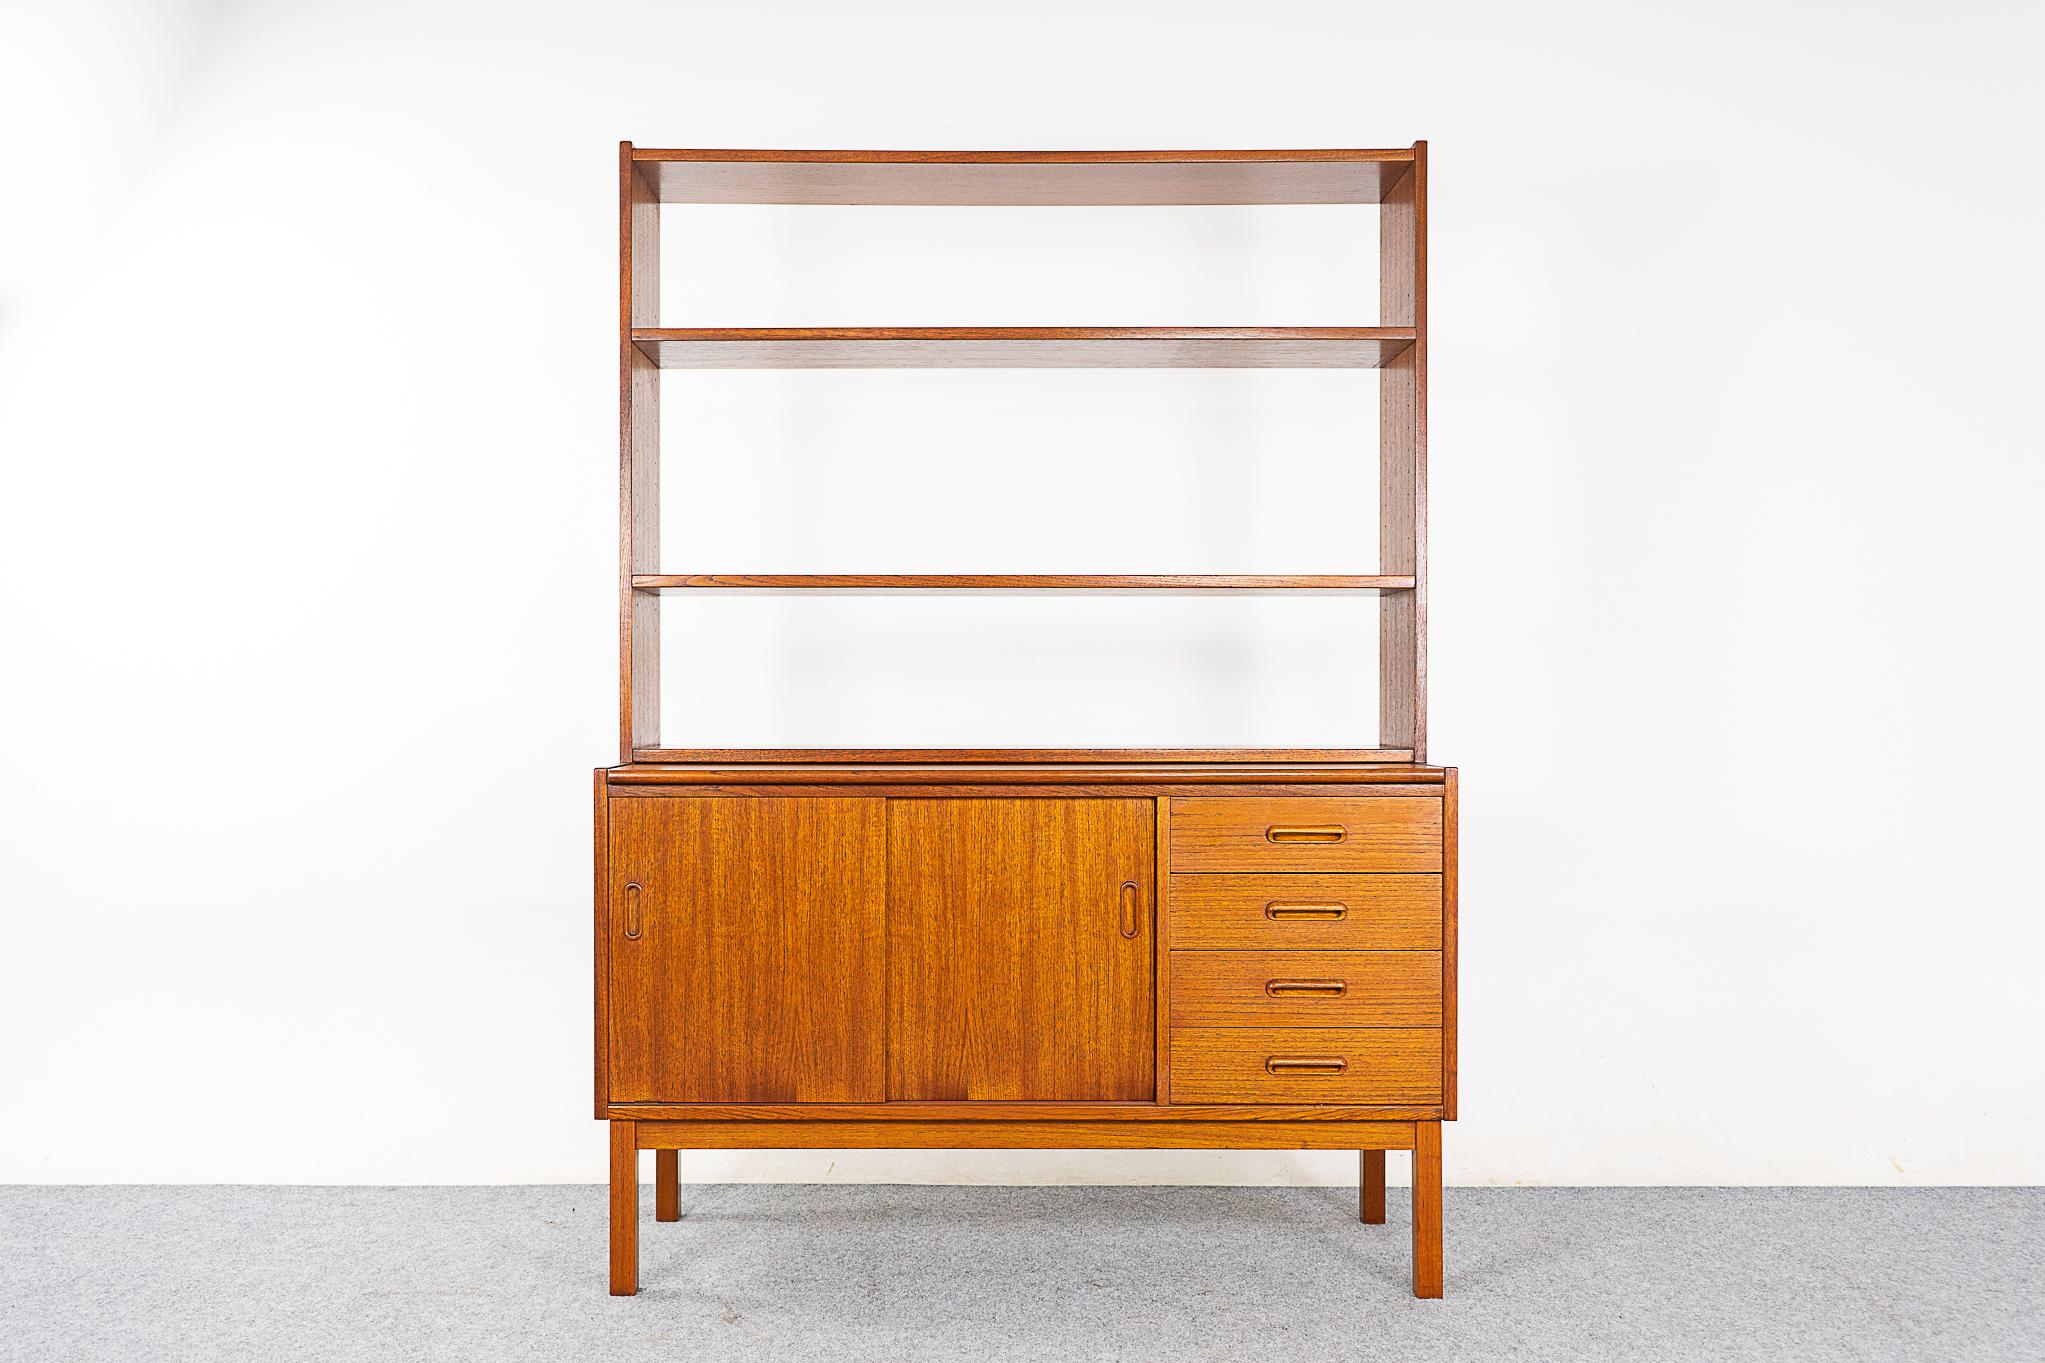 Teak mid-century bookcase/cabinet and desk, circa 1960's. Highly functional design combines drawers, sliding door storage, pull out desk and an open bookshelf. One compact footprint, with much versatility!  

Please inquire for remote and